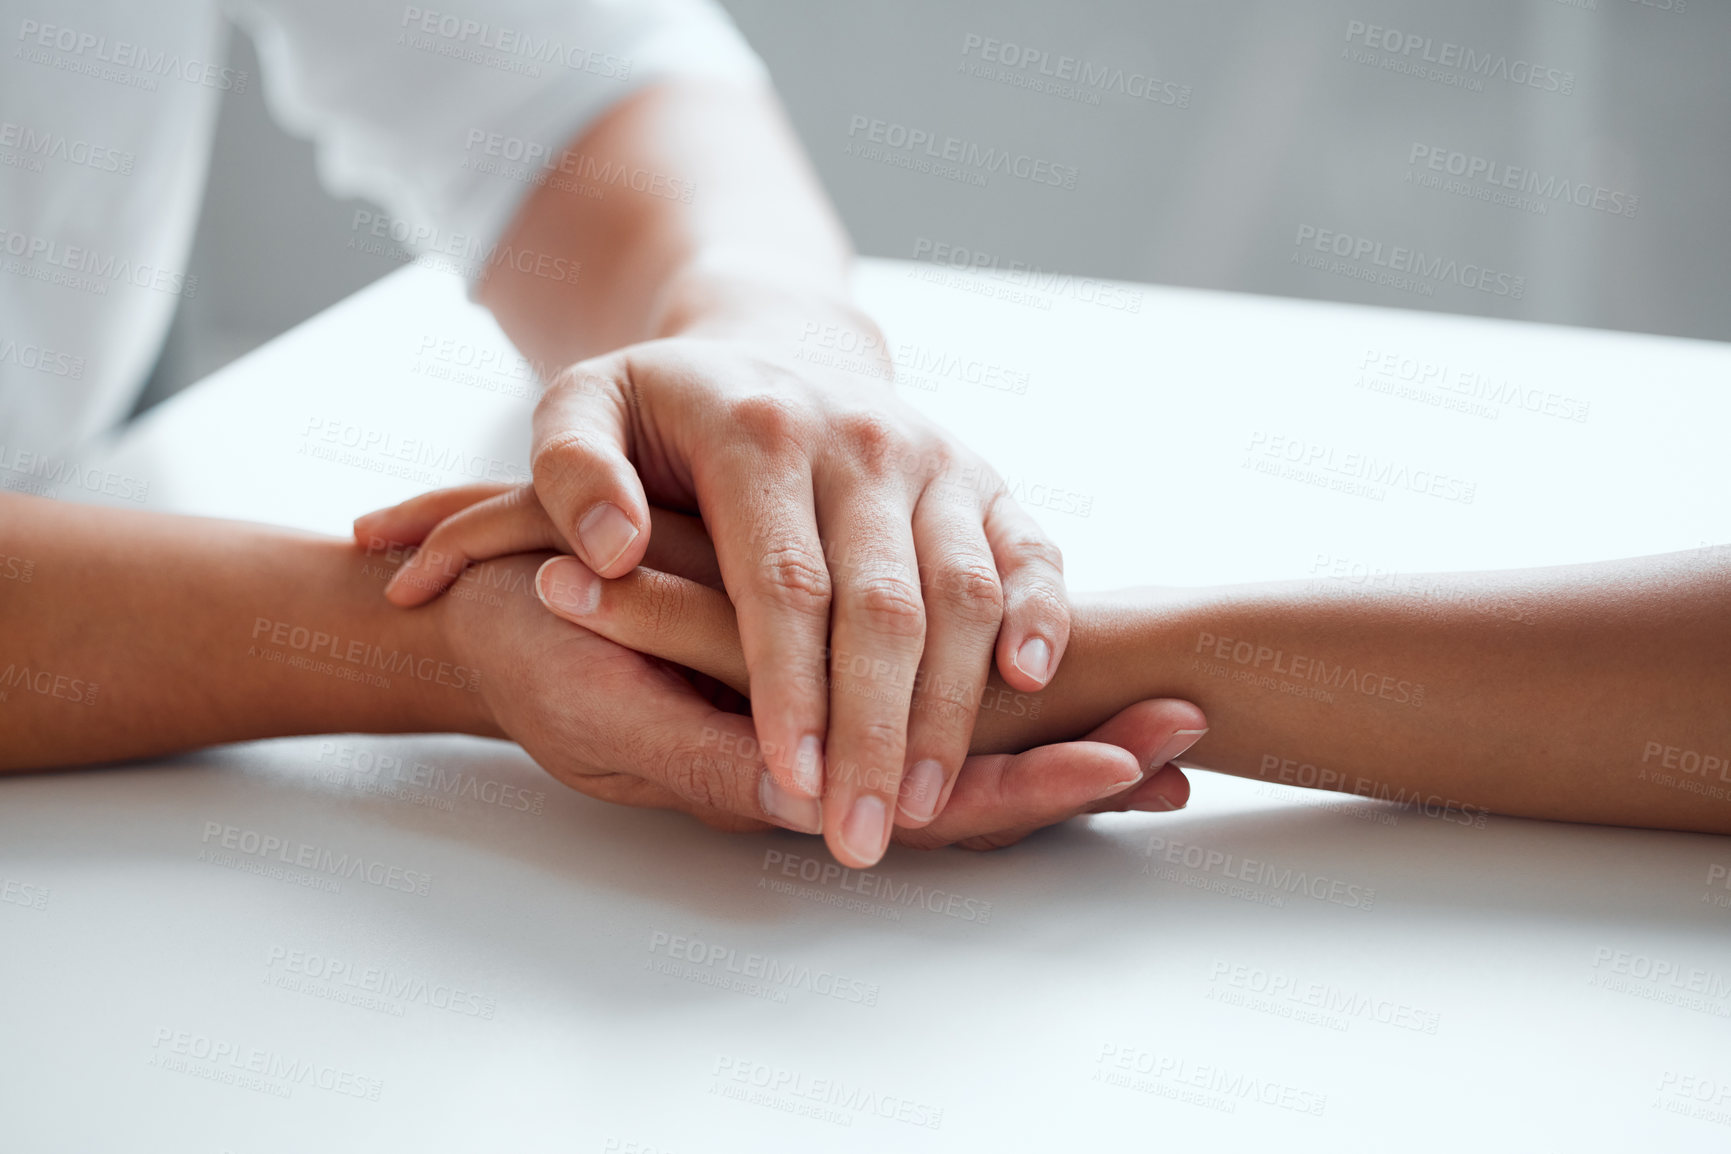 Buy stock photo Hands, support and hope for console or care on table, comfort empathy for bad news or illness. Closeup, people and unity in crisis by prayer, trust or bond for person suffering with diagnosis